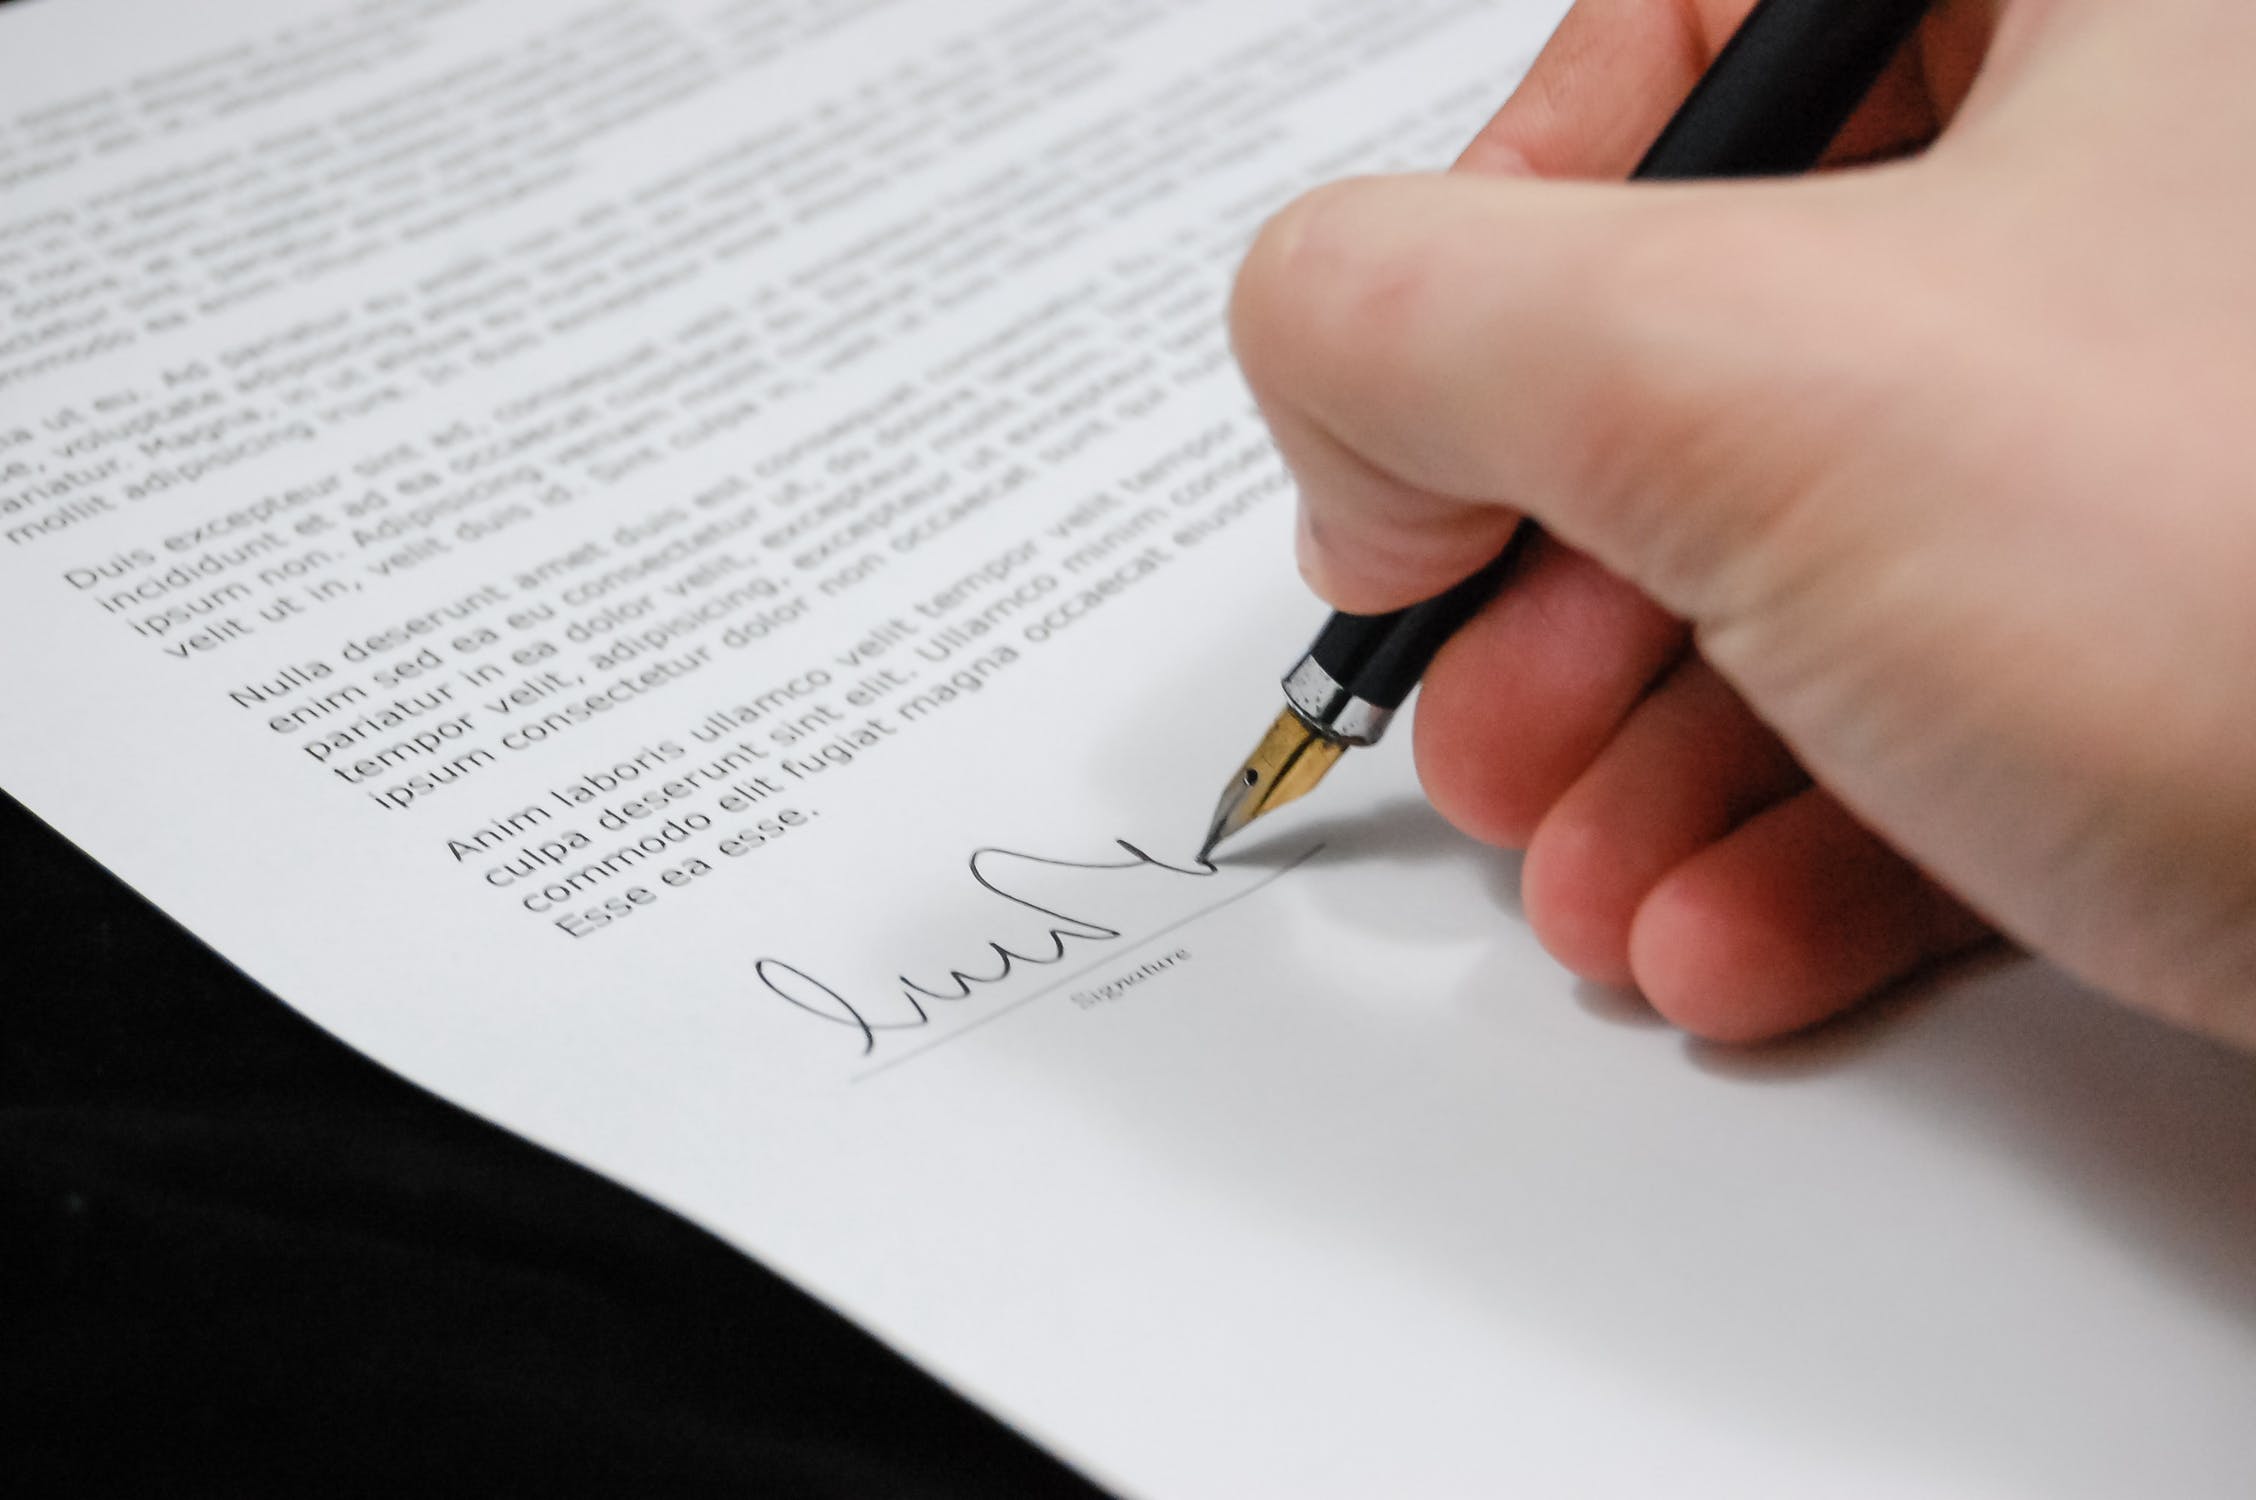 Party To Divorce Claims He Was Coerced Into Signing Agreement thumbnail image